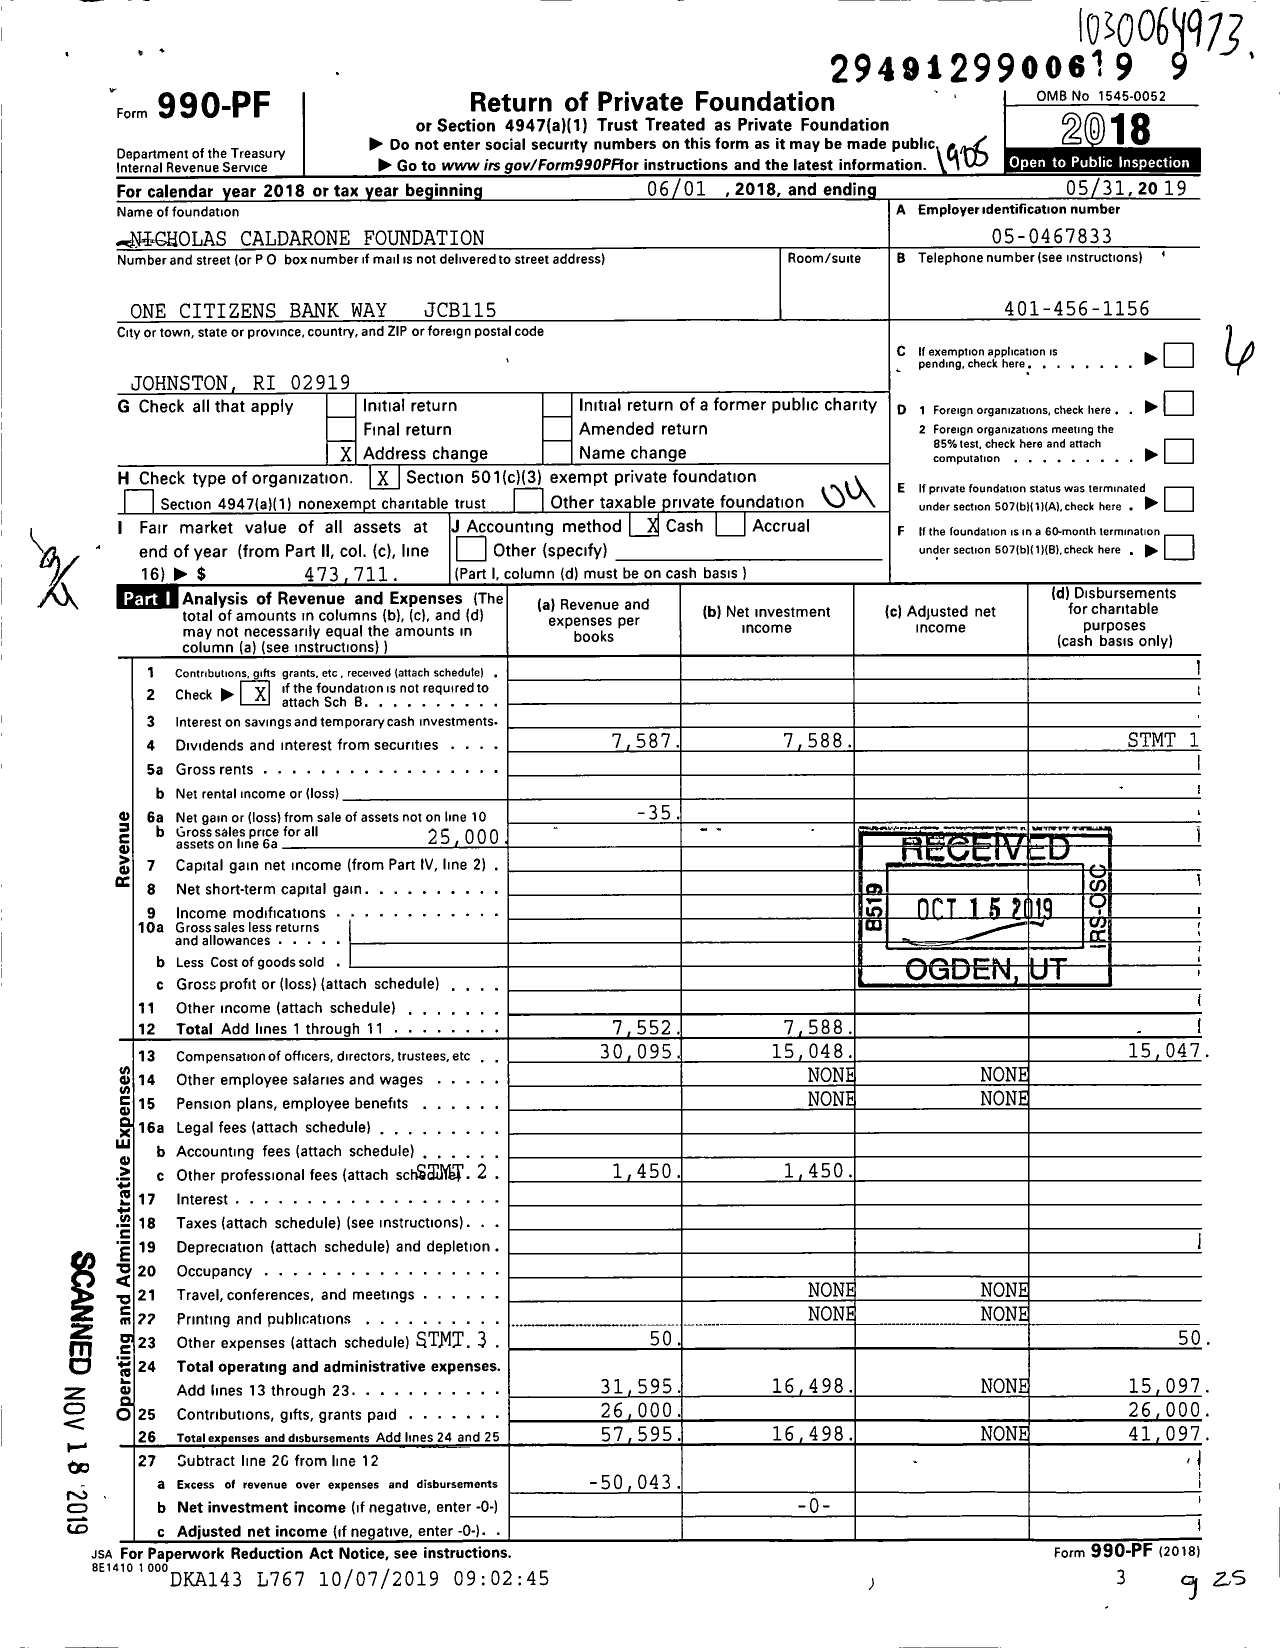 Image of first page of 2018 Form 990PF for Nicholas Caldarone Foundation